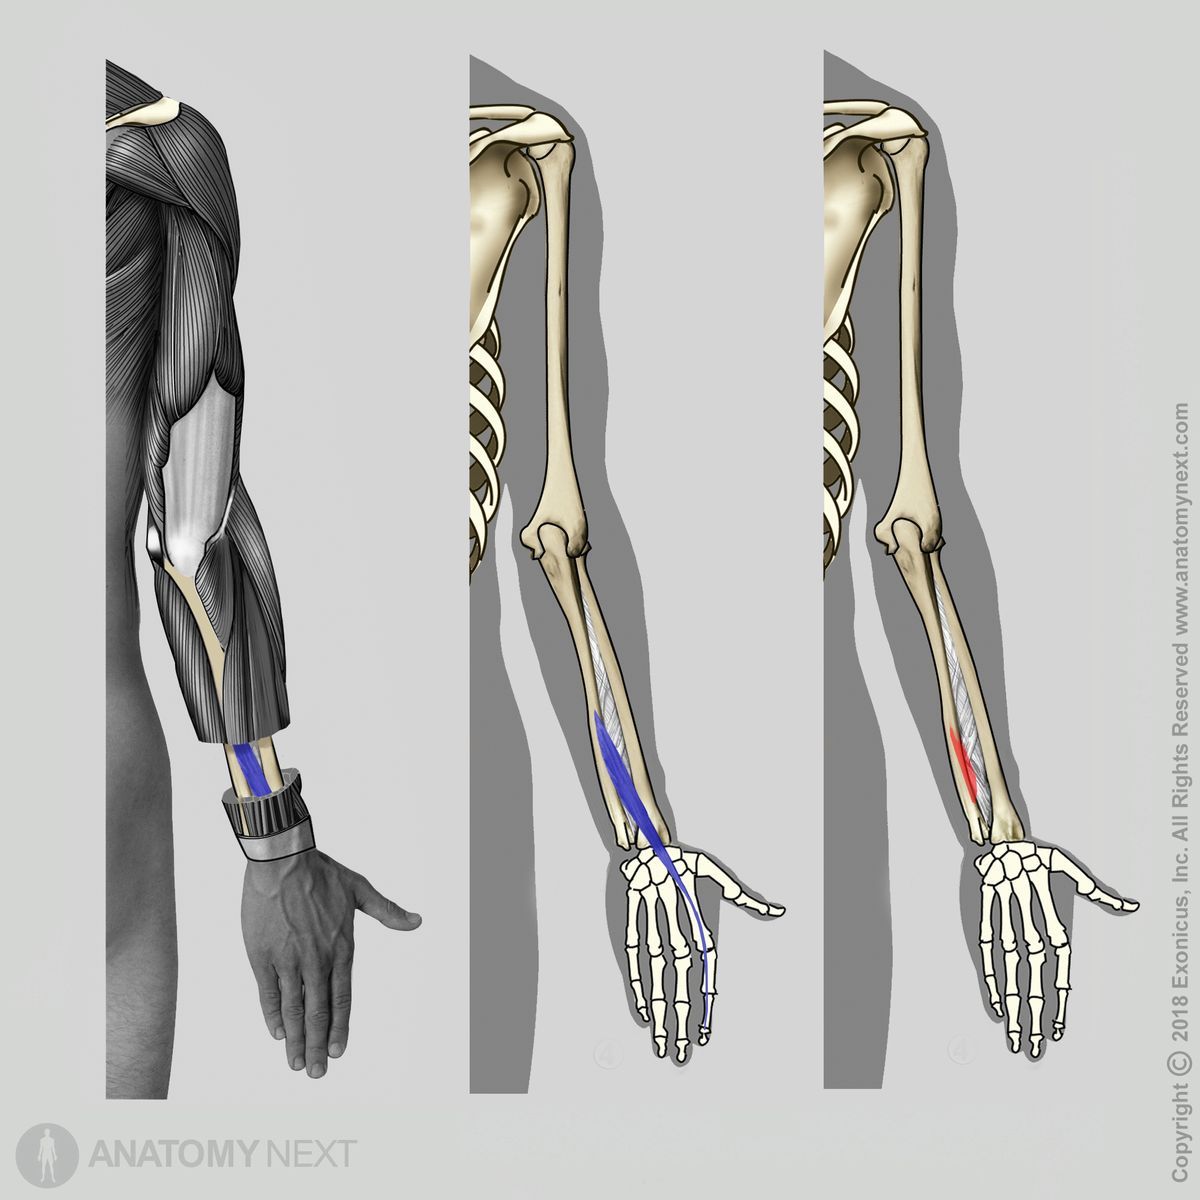 Extensor indicis, Origin of extensor indicis, Insertion of extensor indicis, Forearm muscles, Muscles of the forearm, Posterior compartment muscles, Posterior compartment of the forearm, Arm muscles, Muscles of upper limb, Human arm, Human muscles